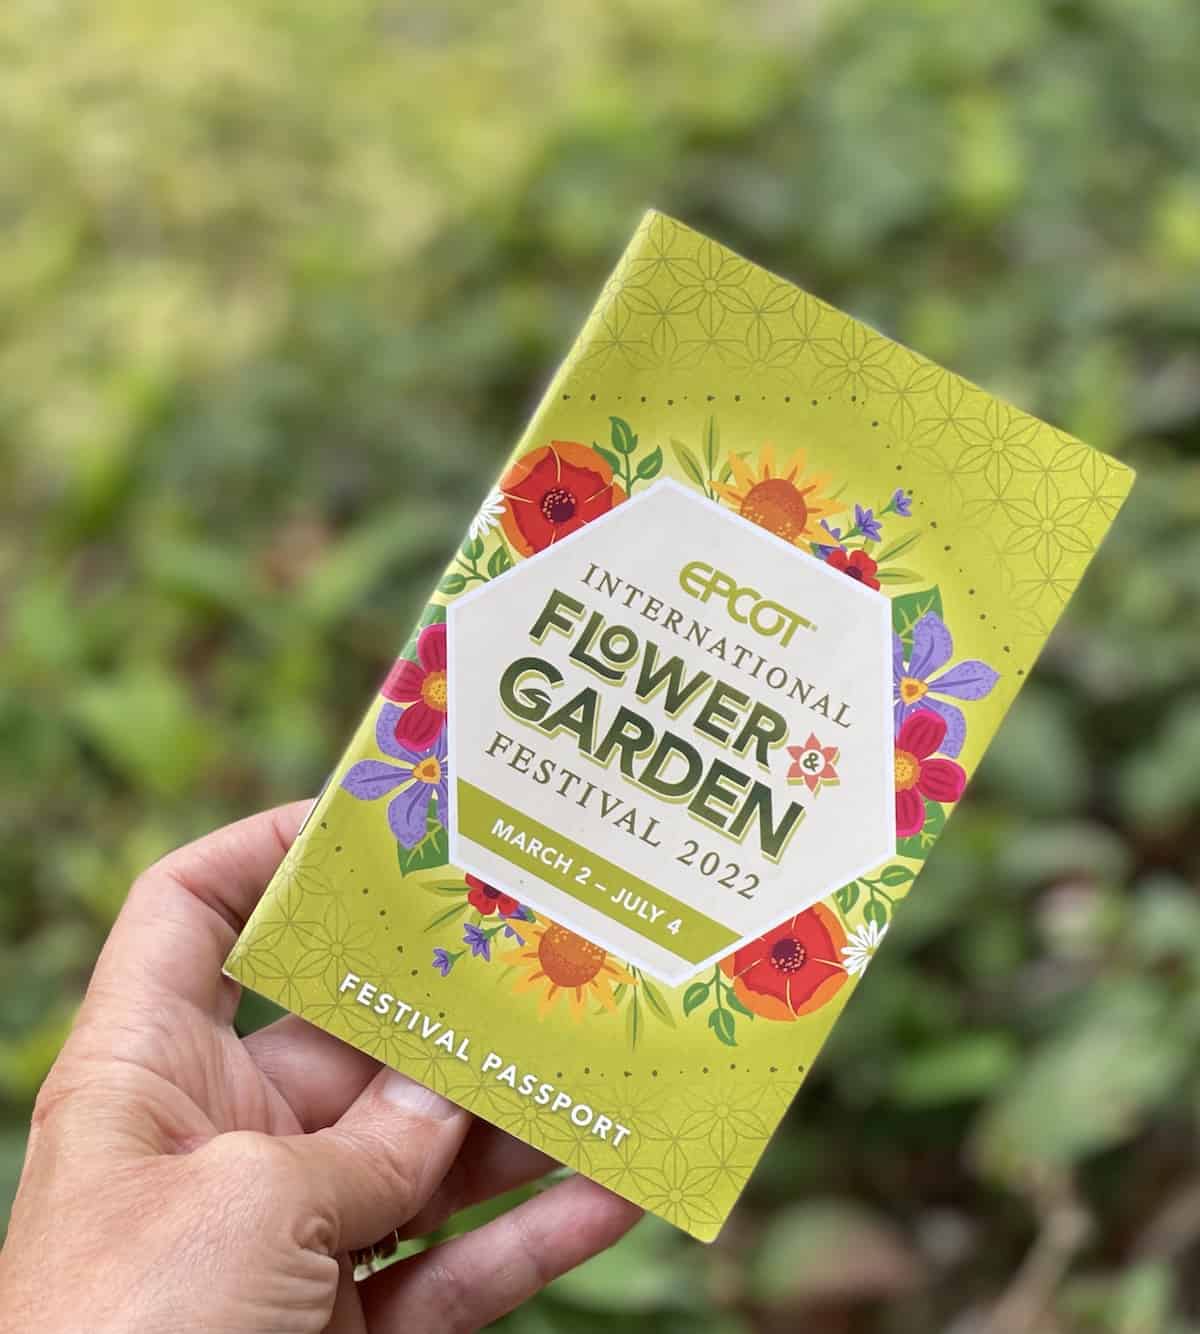 EPCOT Flower and Garden Festival 2022 booklet